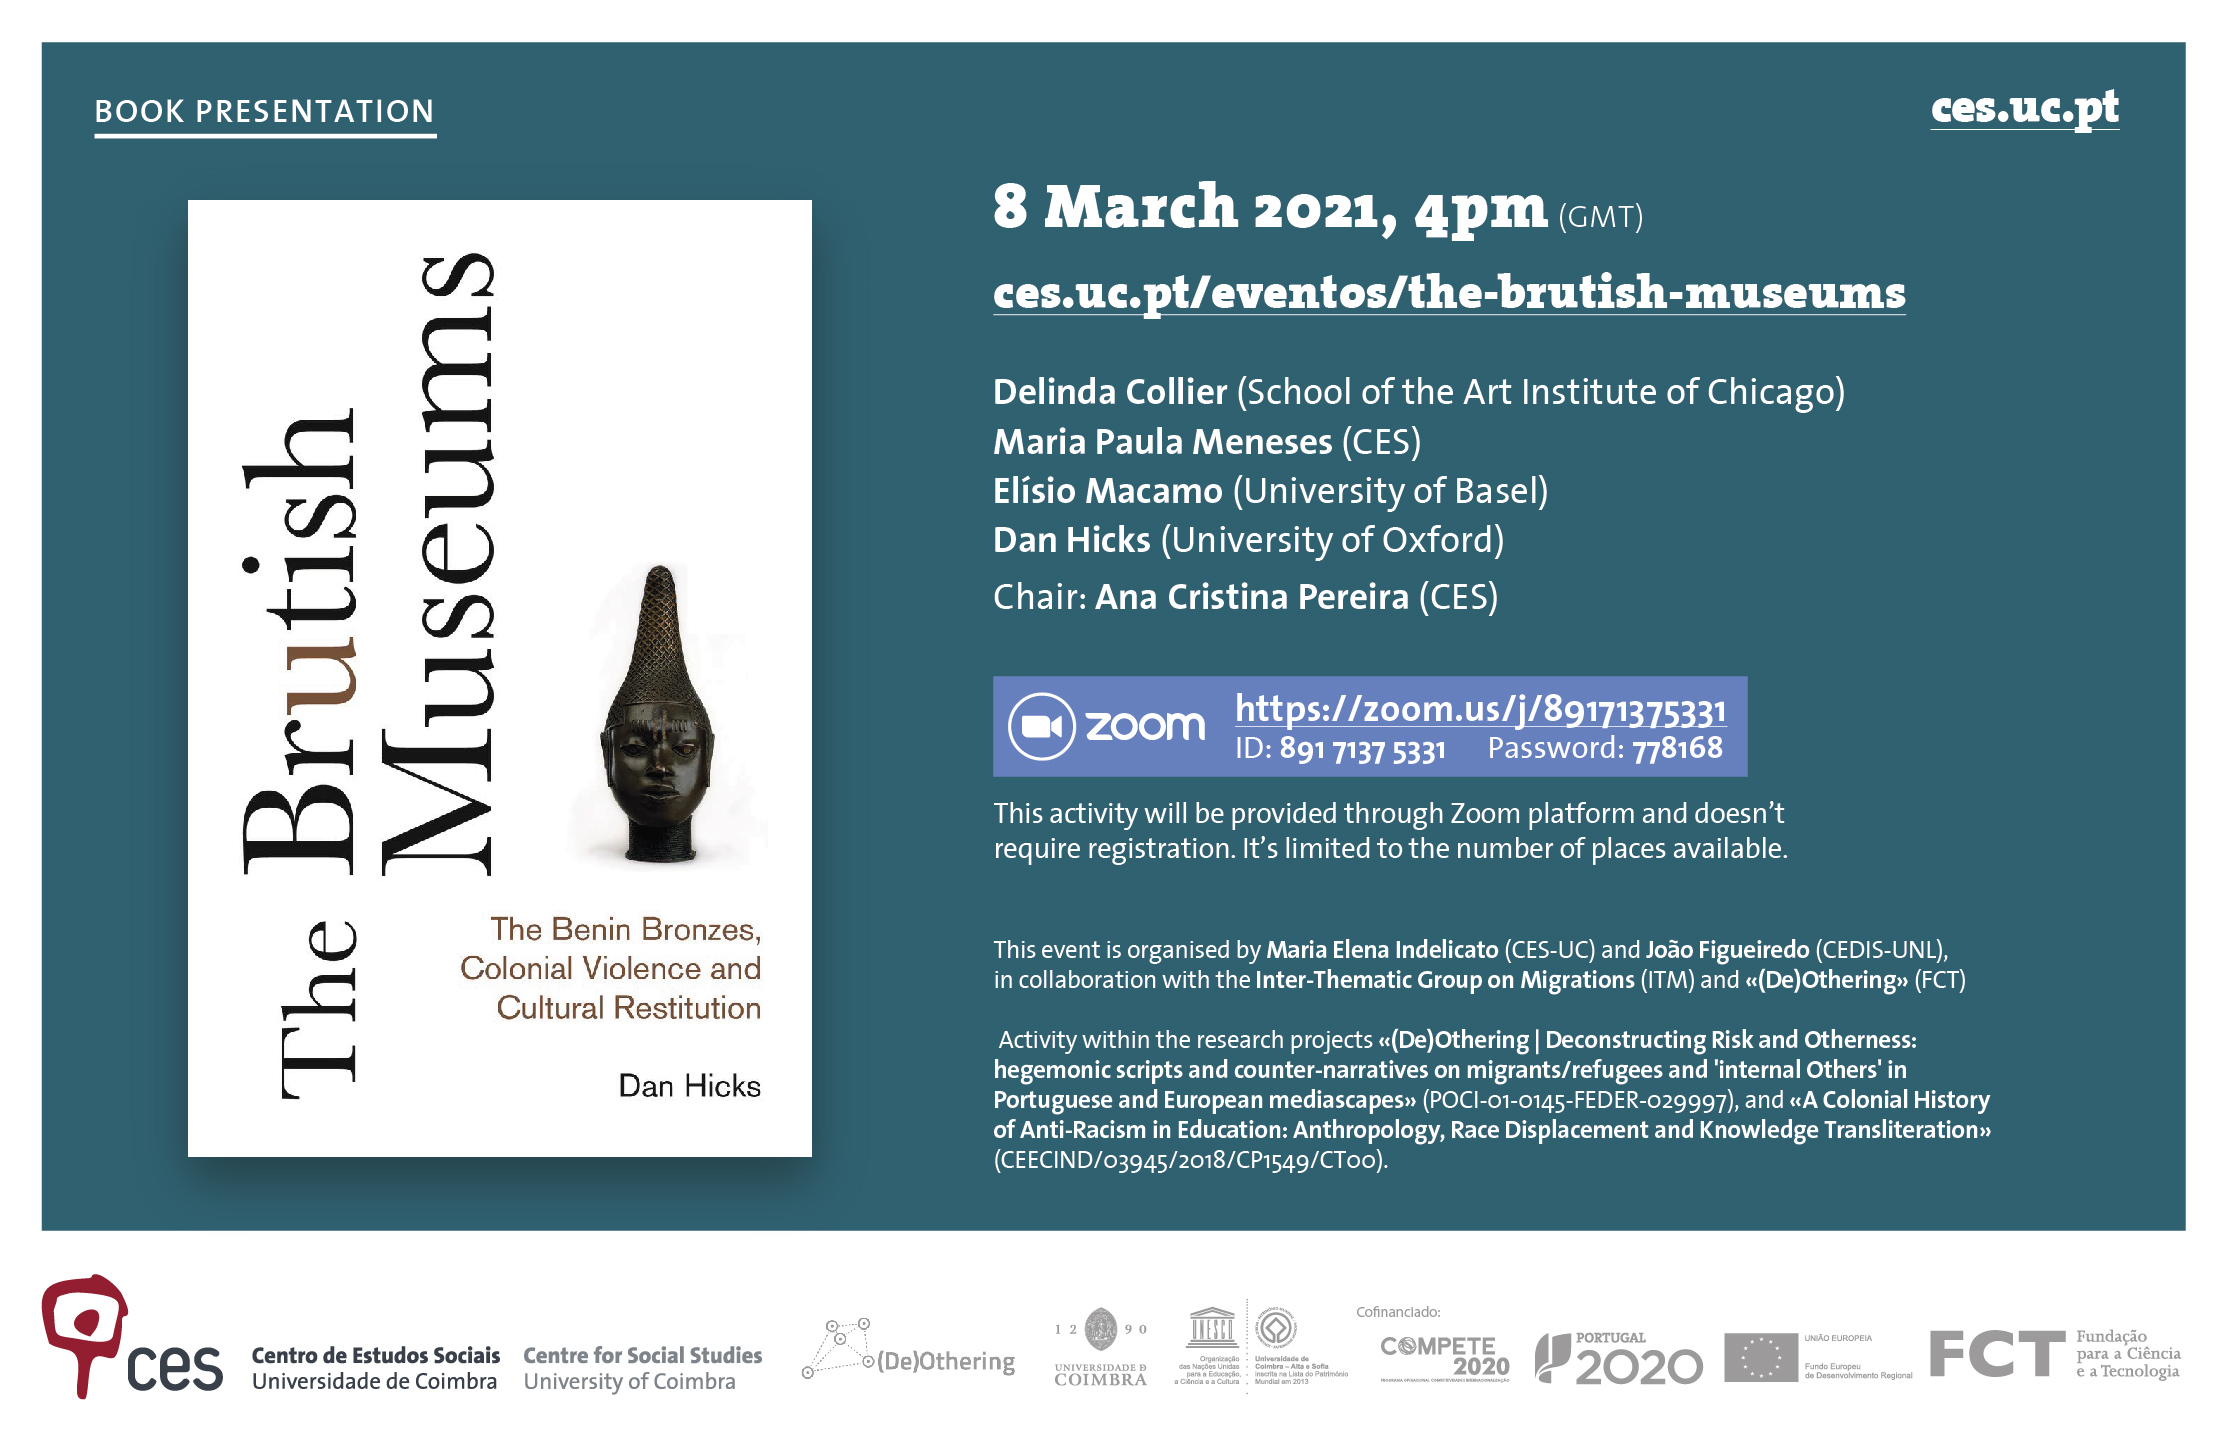 «The Brutish Museums: The Benin Bronzes, Colonial Violence and Cultural Restitution» de Dan Hicks<span id="edit_32608"><script>$(function() { $('#edit_32608').load( "/myces/user/editobj.php?tipo=evento&id=32608" ); });</script></span>